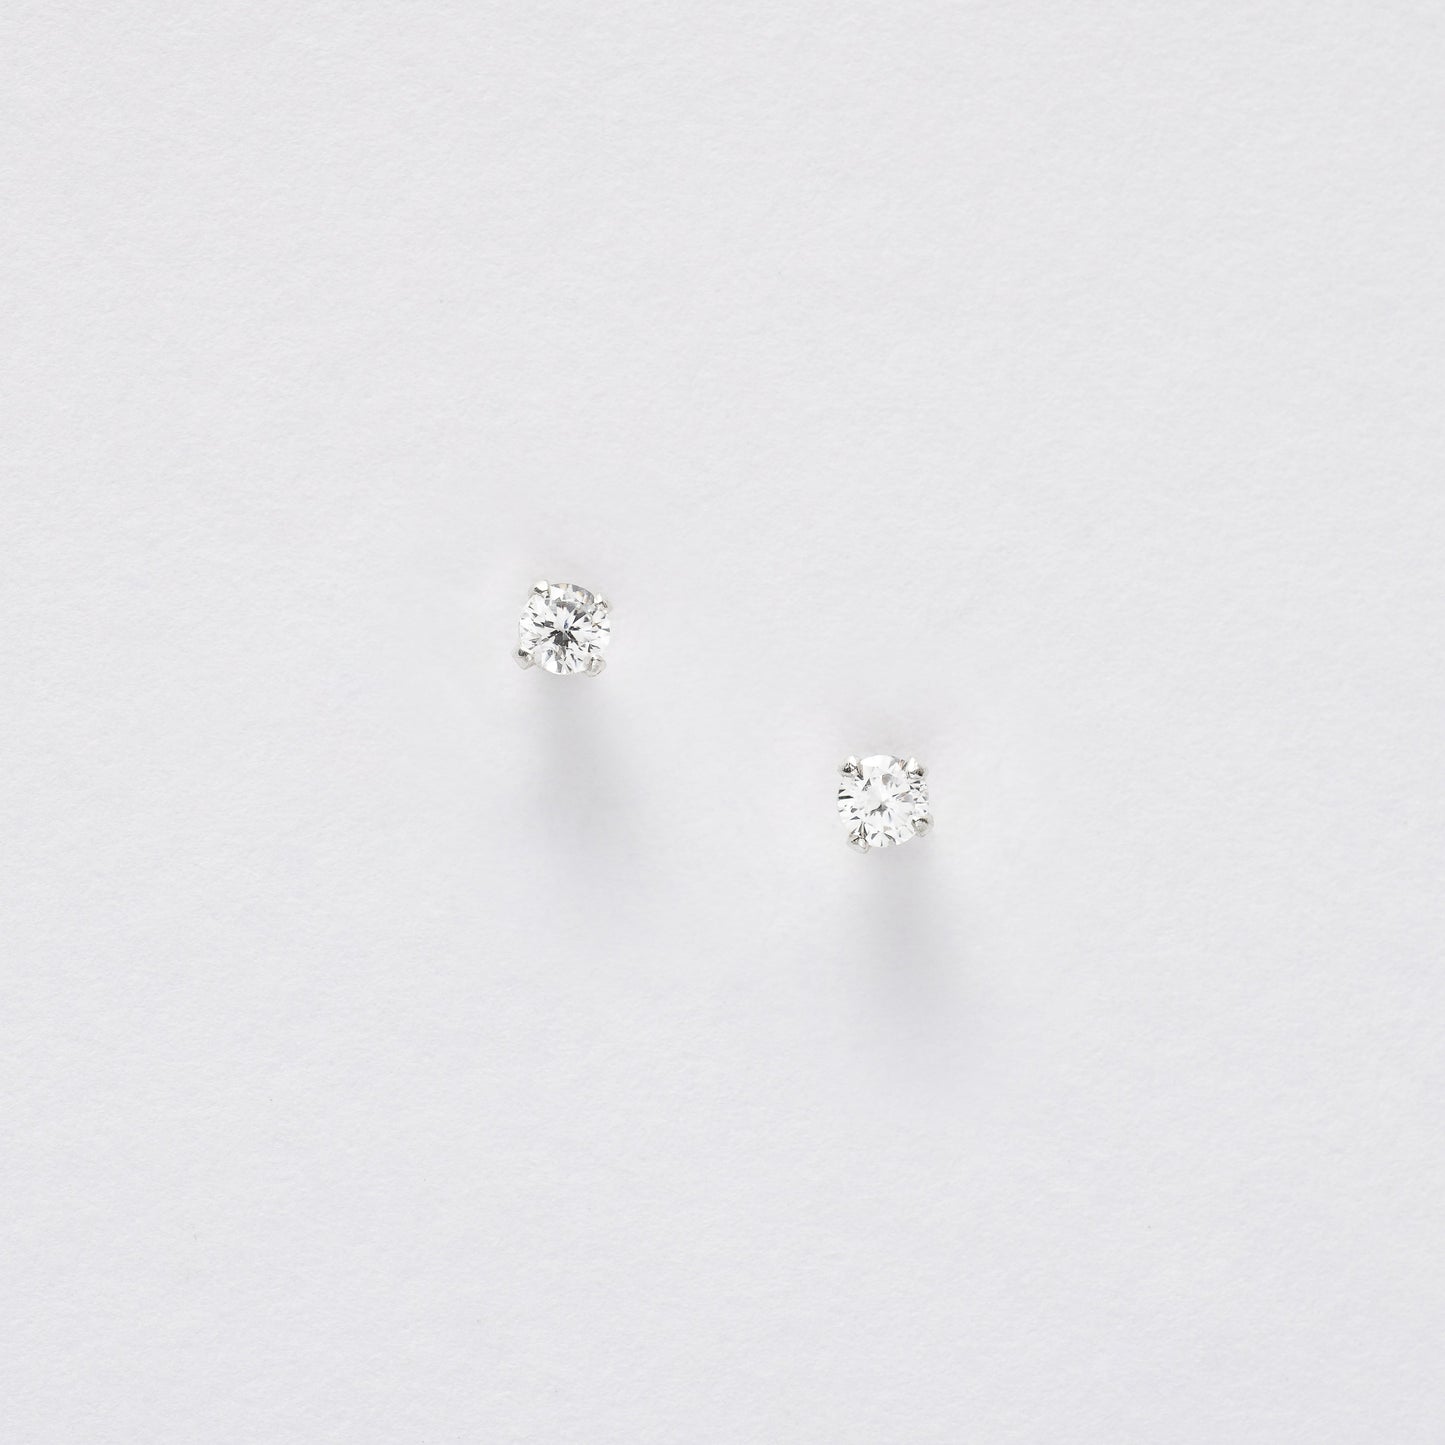 Cubic Zirconia Silver Ear Stud Earrings Crumble and Core   